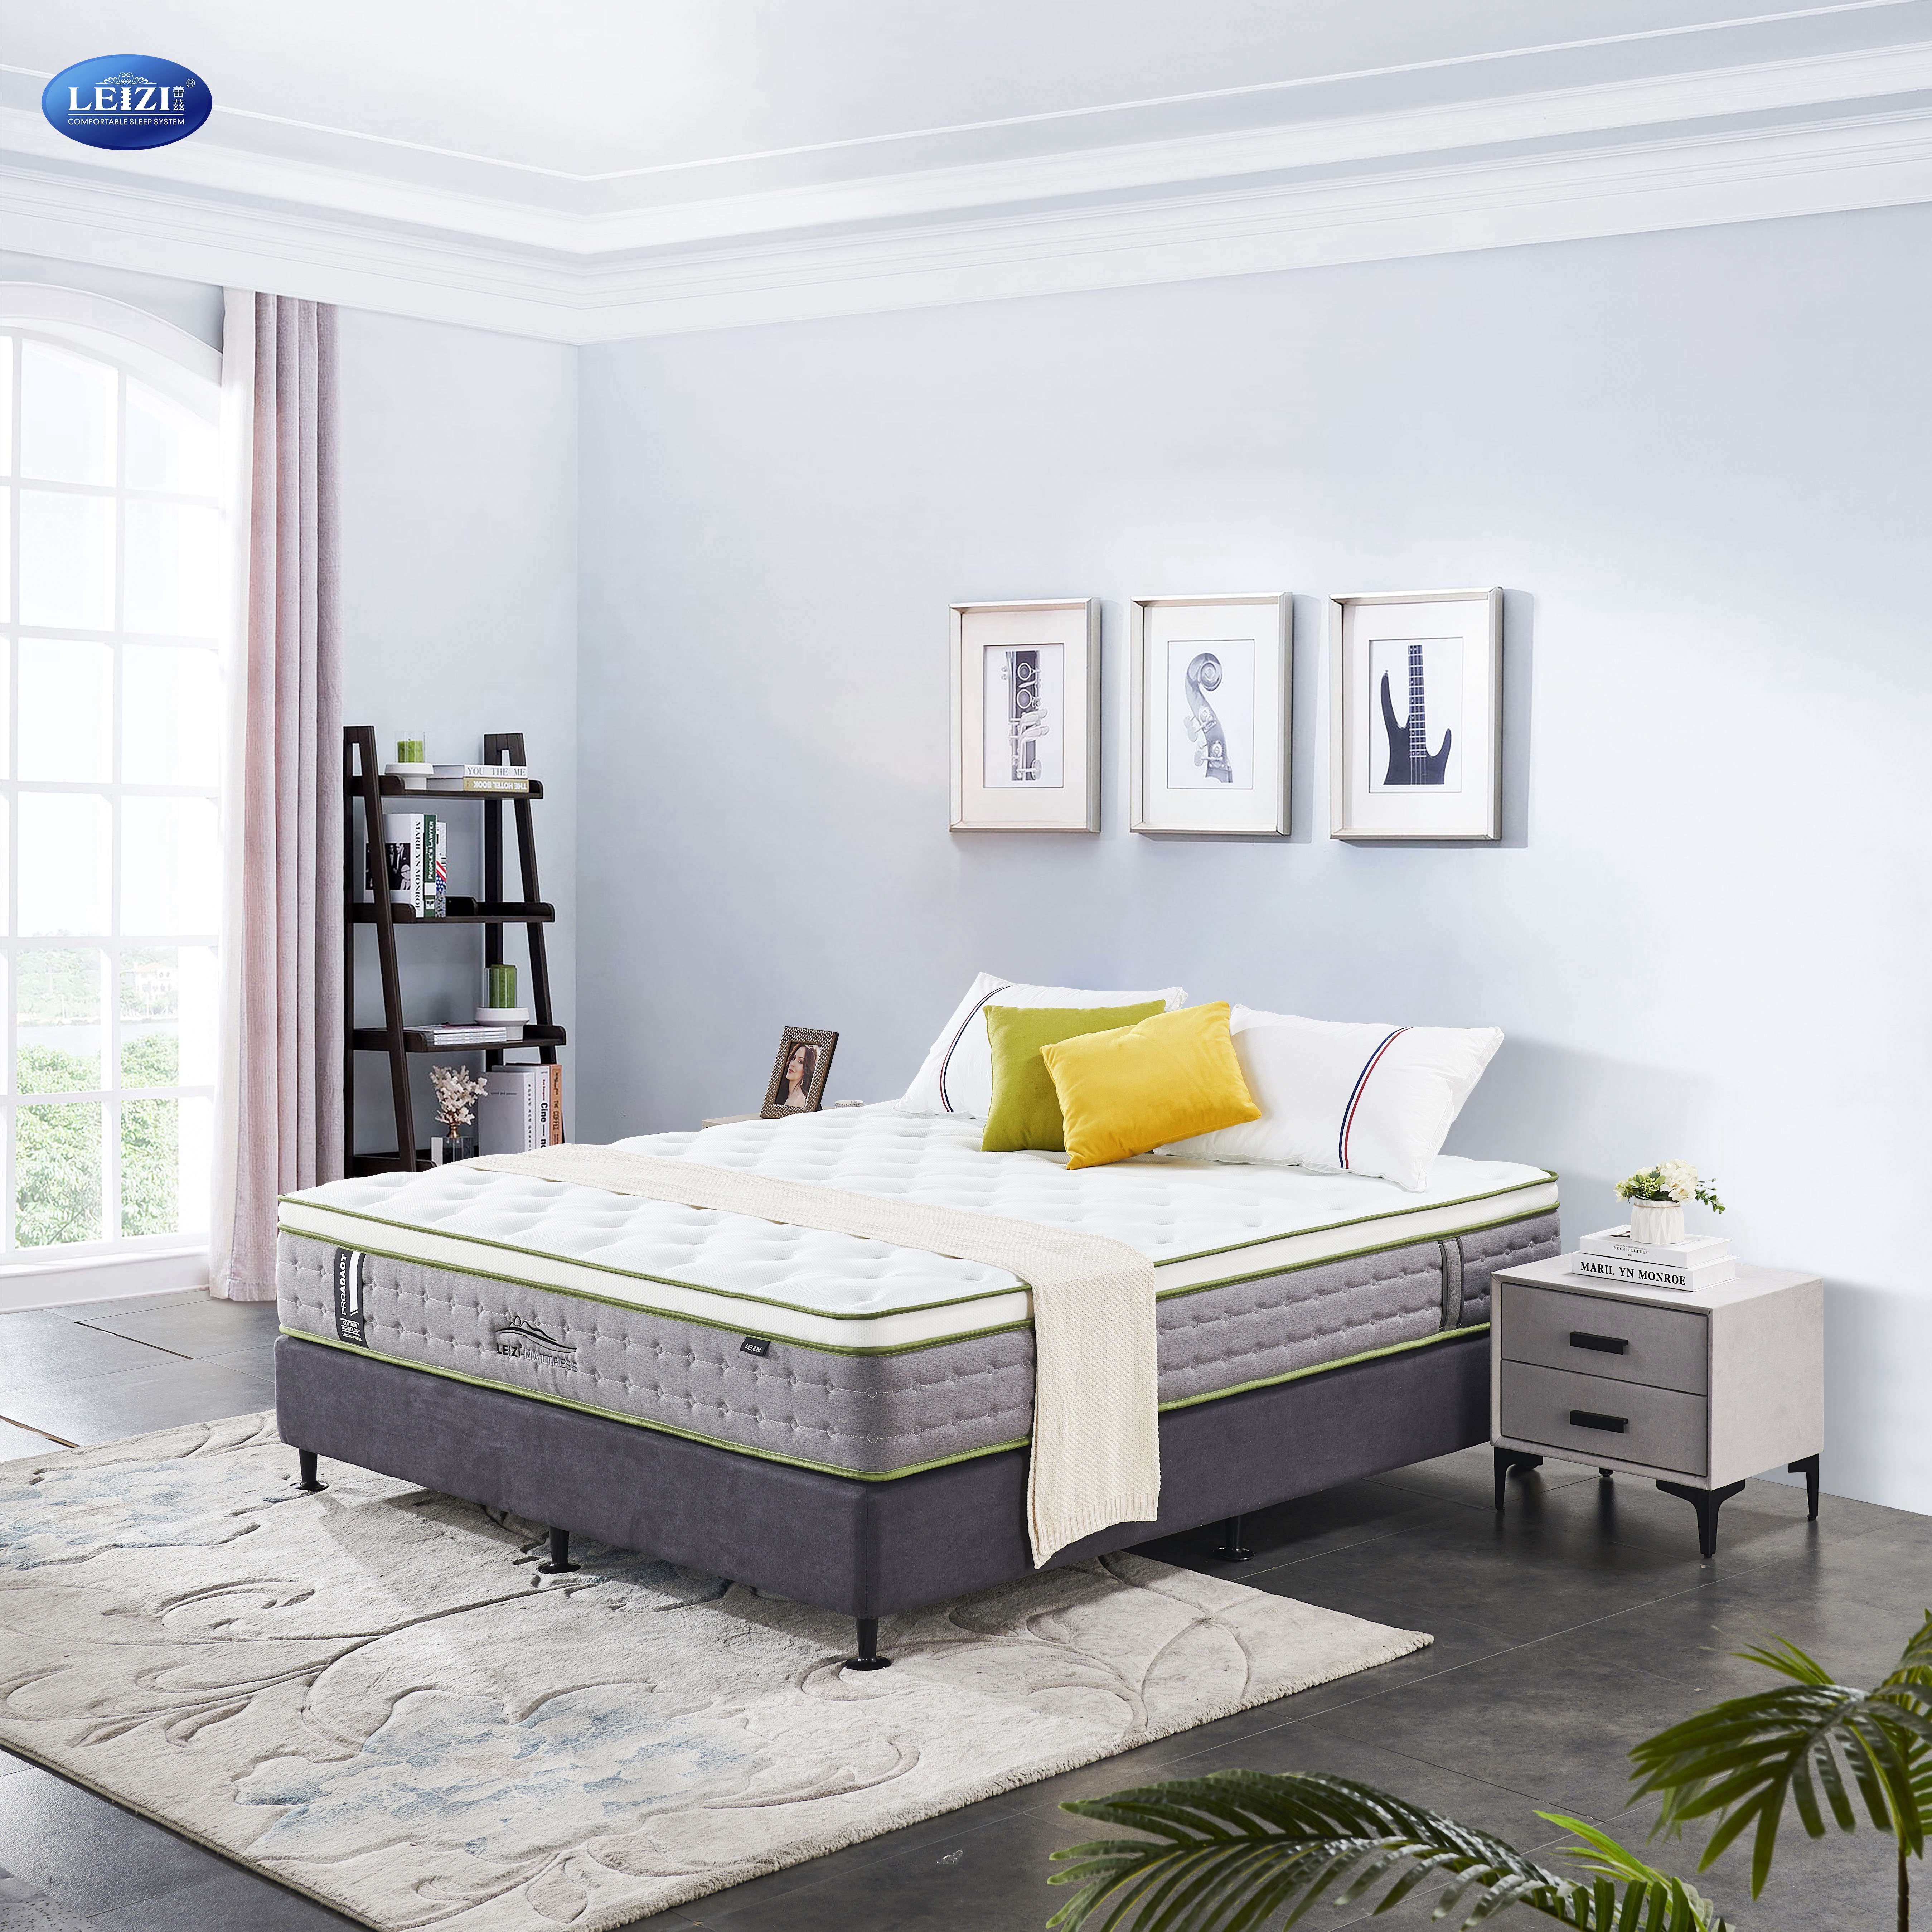 Why Memory Foam Is Good As The Material Of Mattress?